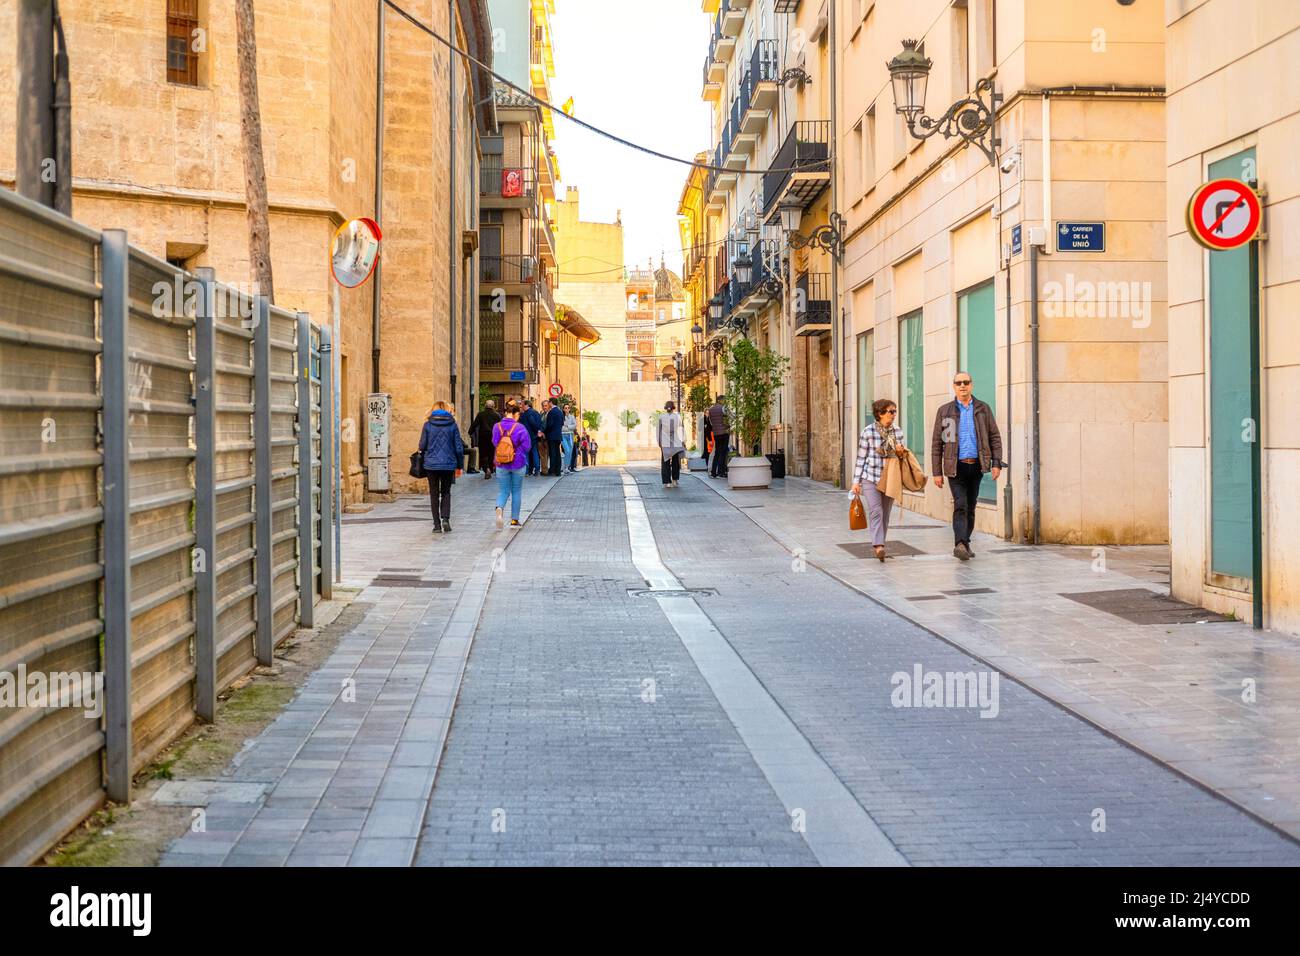 Narrow colonial-style street in the old town district. People go their daily routines in the area. This area is a major tourist attraction. Valencia c Stock Photo